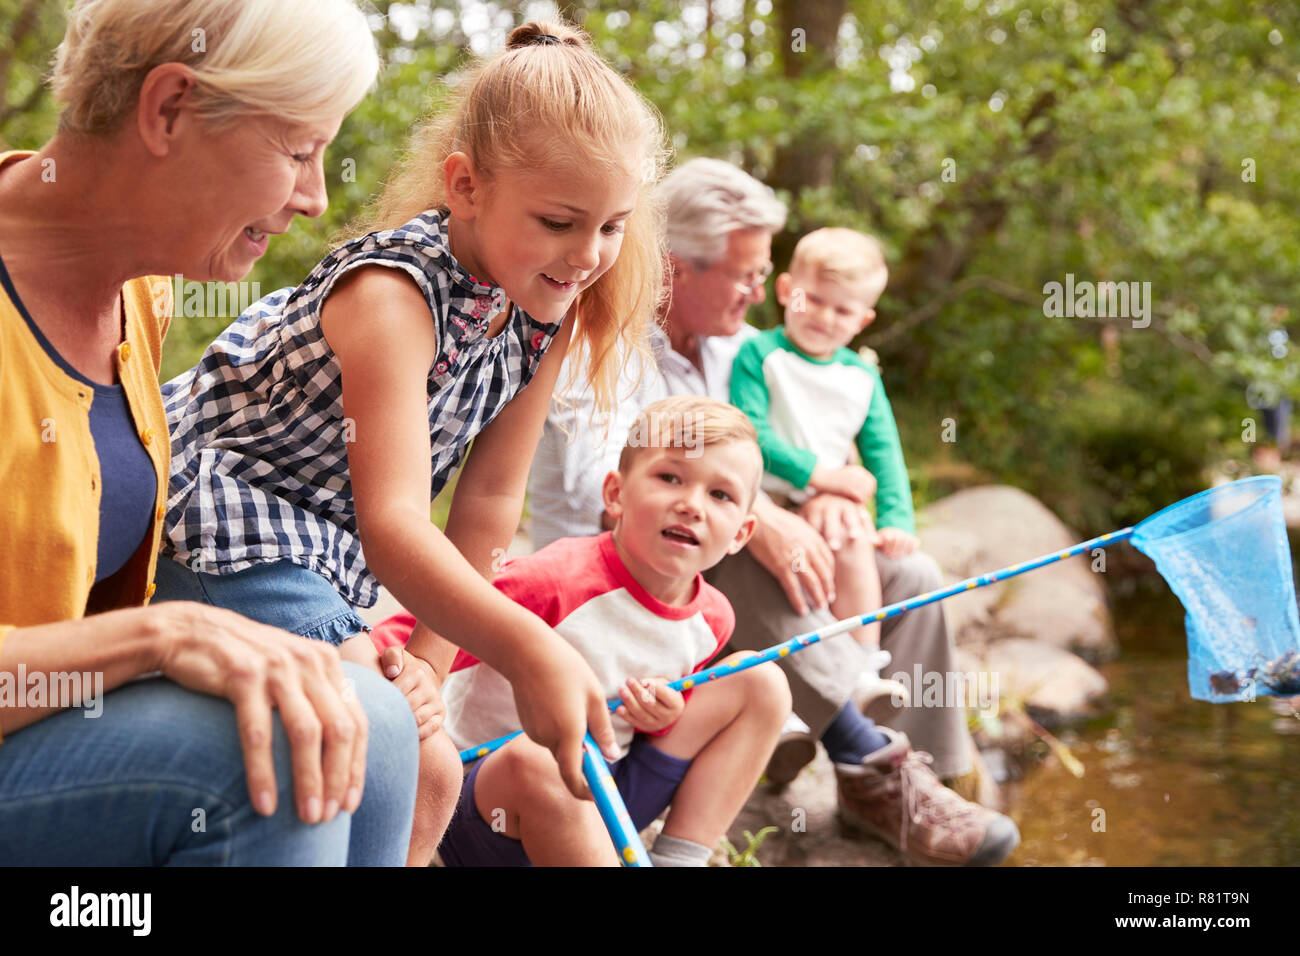 Grandparents With Grandchildren Fishing With Nets In River In UK Lake District Stock Photo